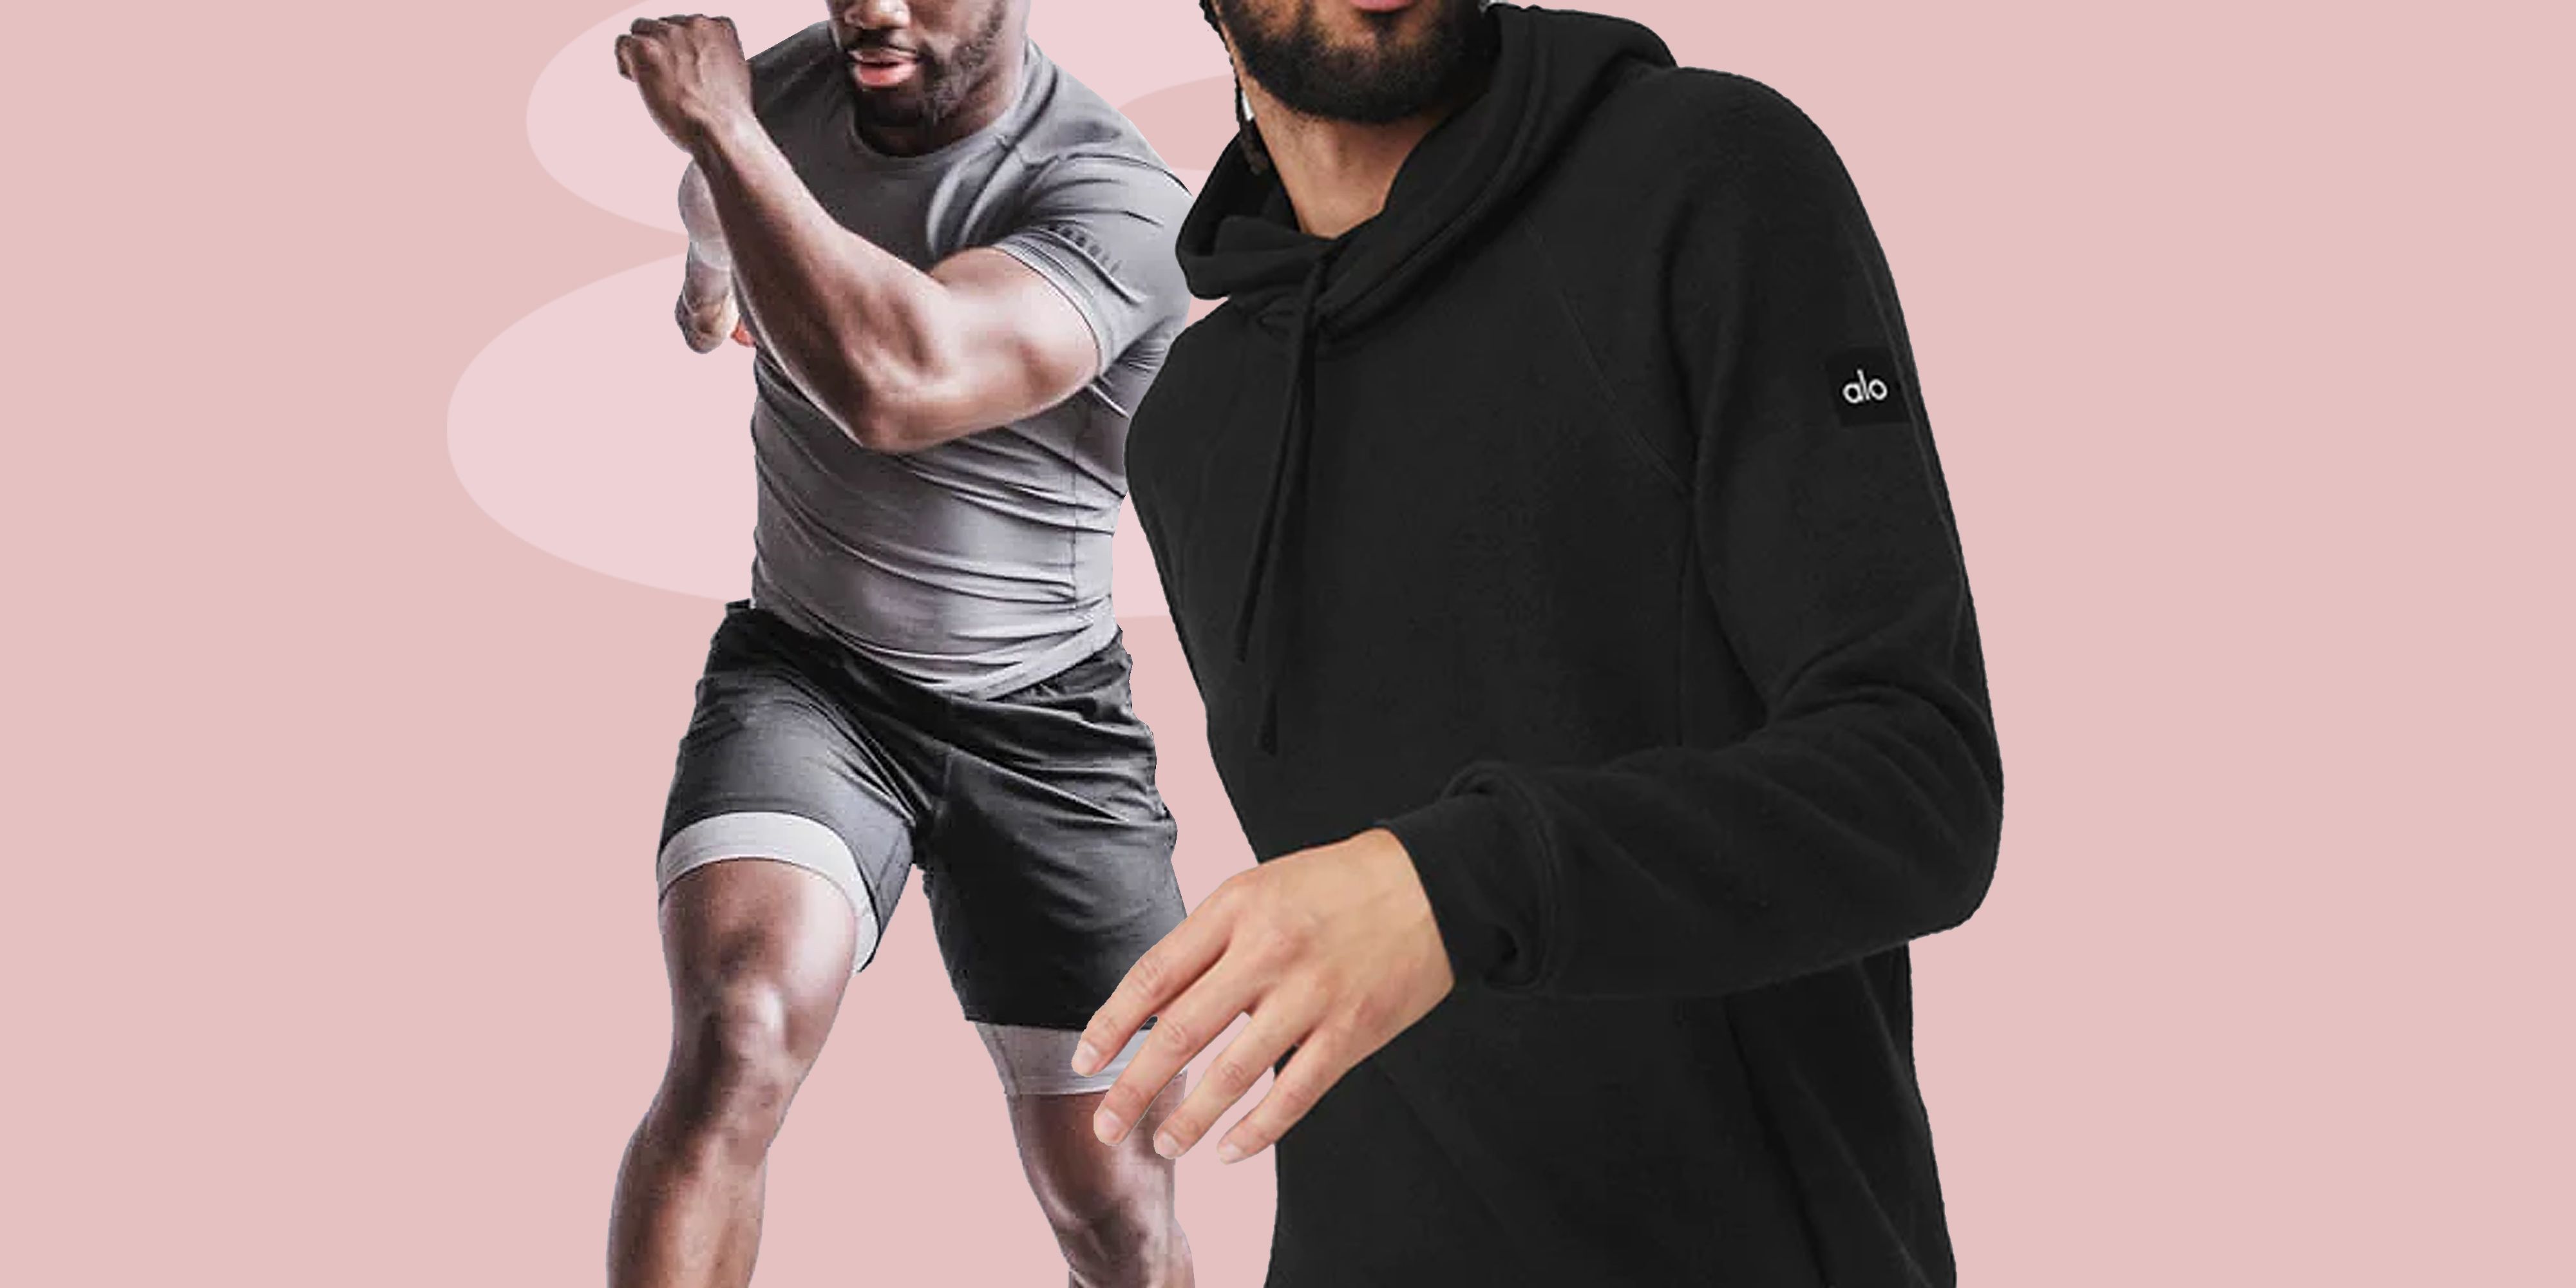 From Gym to Street: Top 10 Men's Athleisure Brands, Gallery posted by  porter